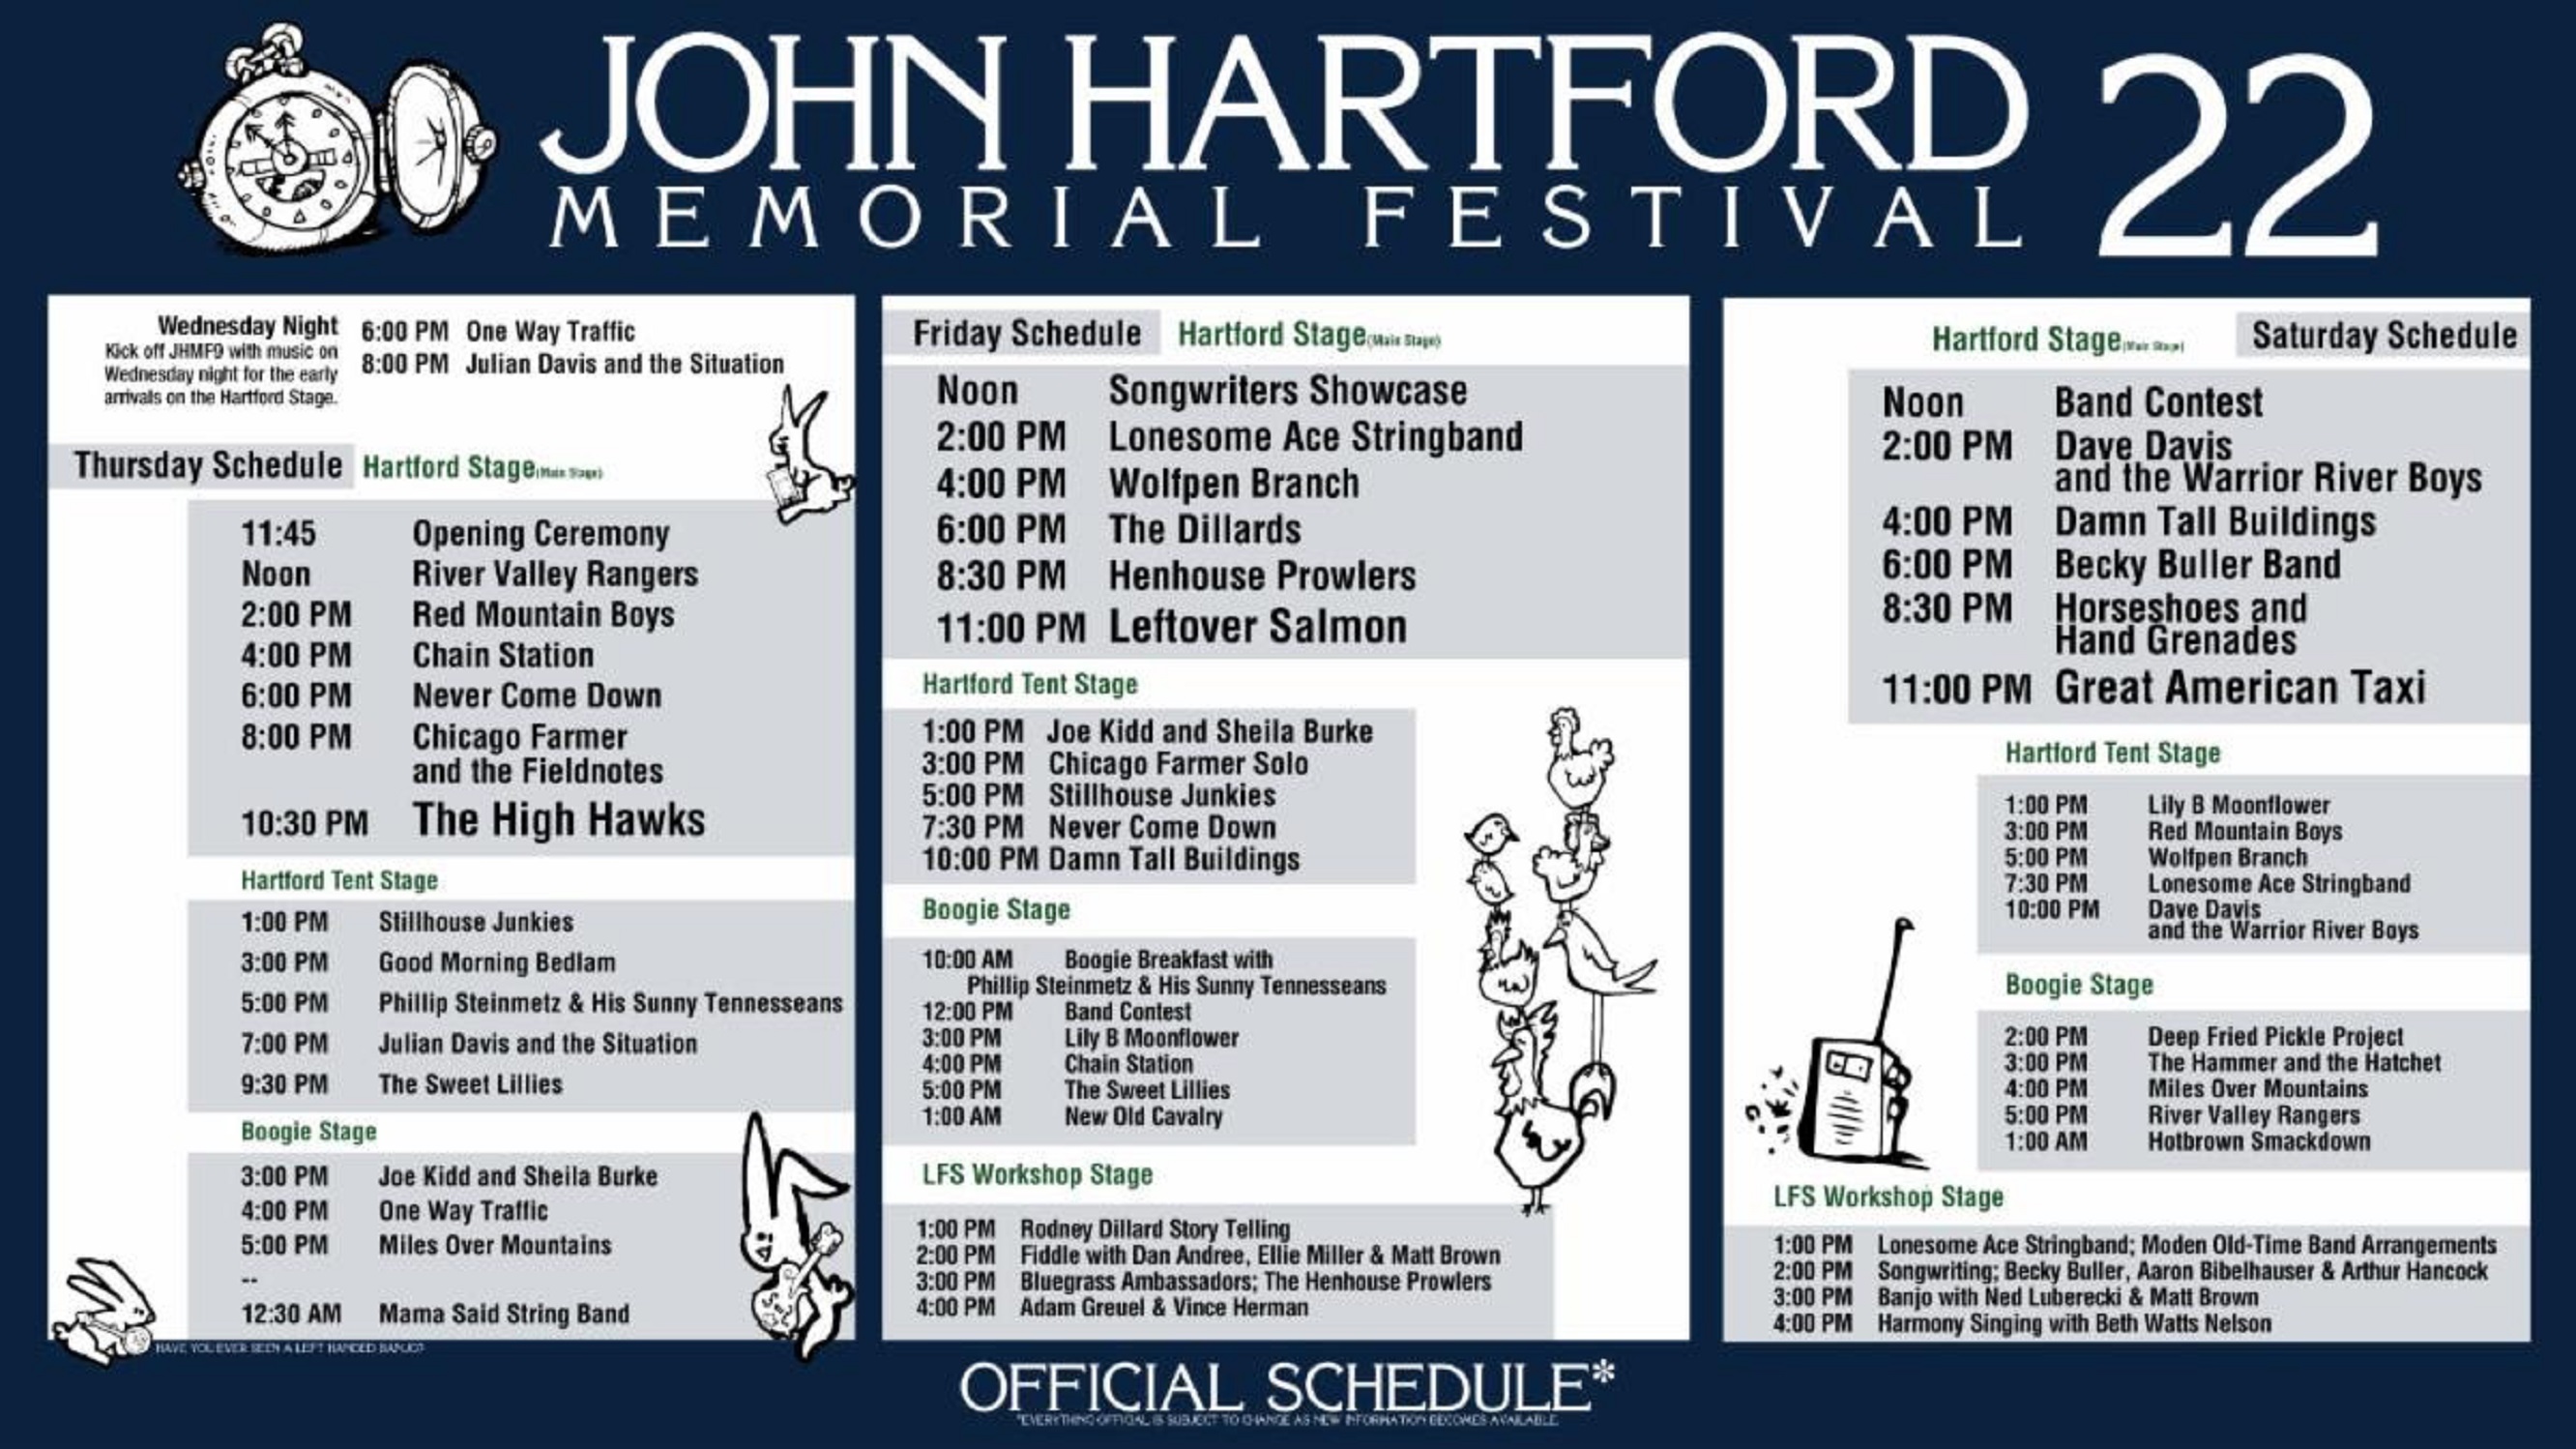 John Hartford Memorial Festival Hourly Stage Schedule and New Stage Announce